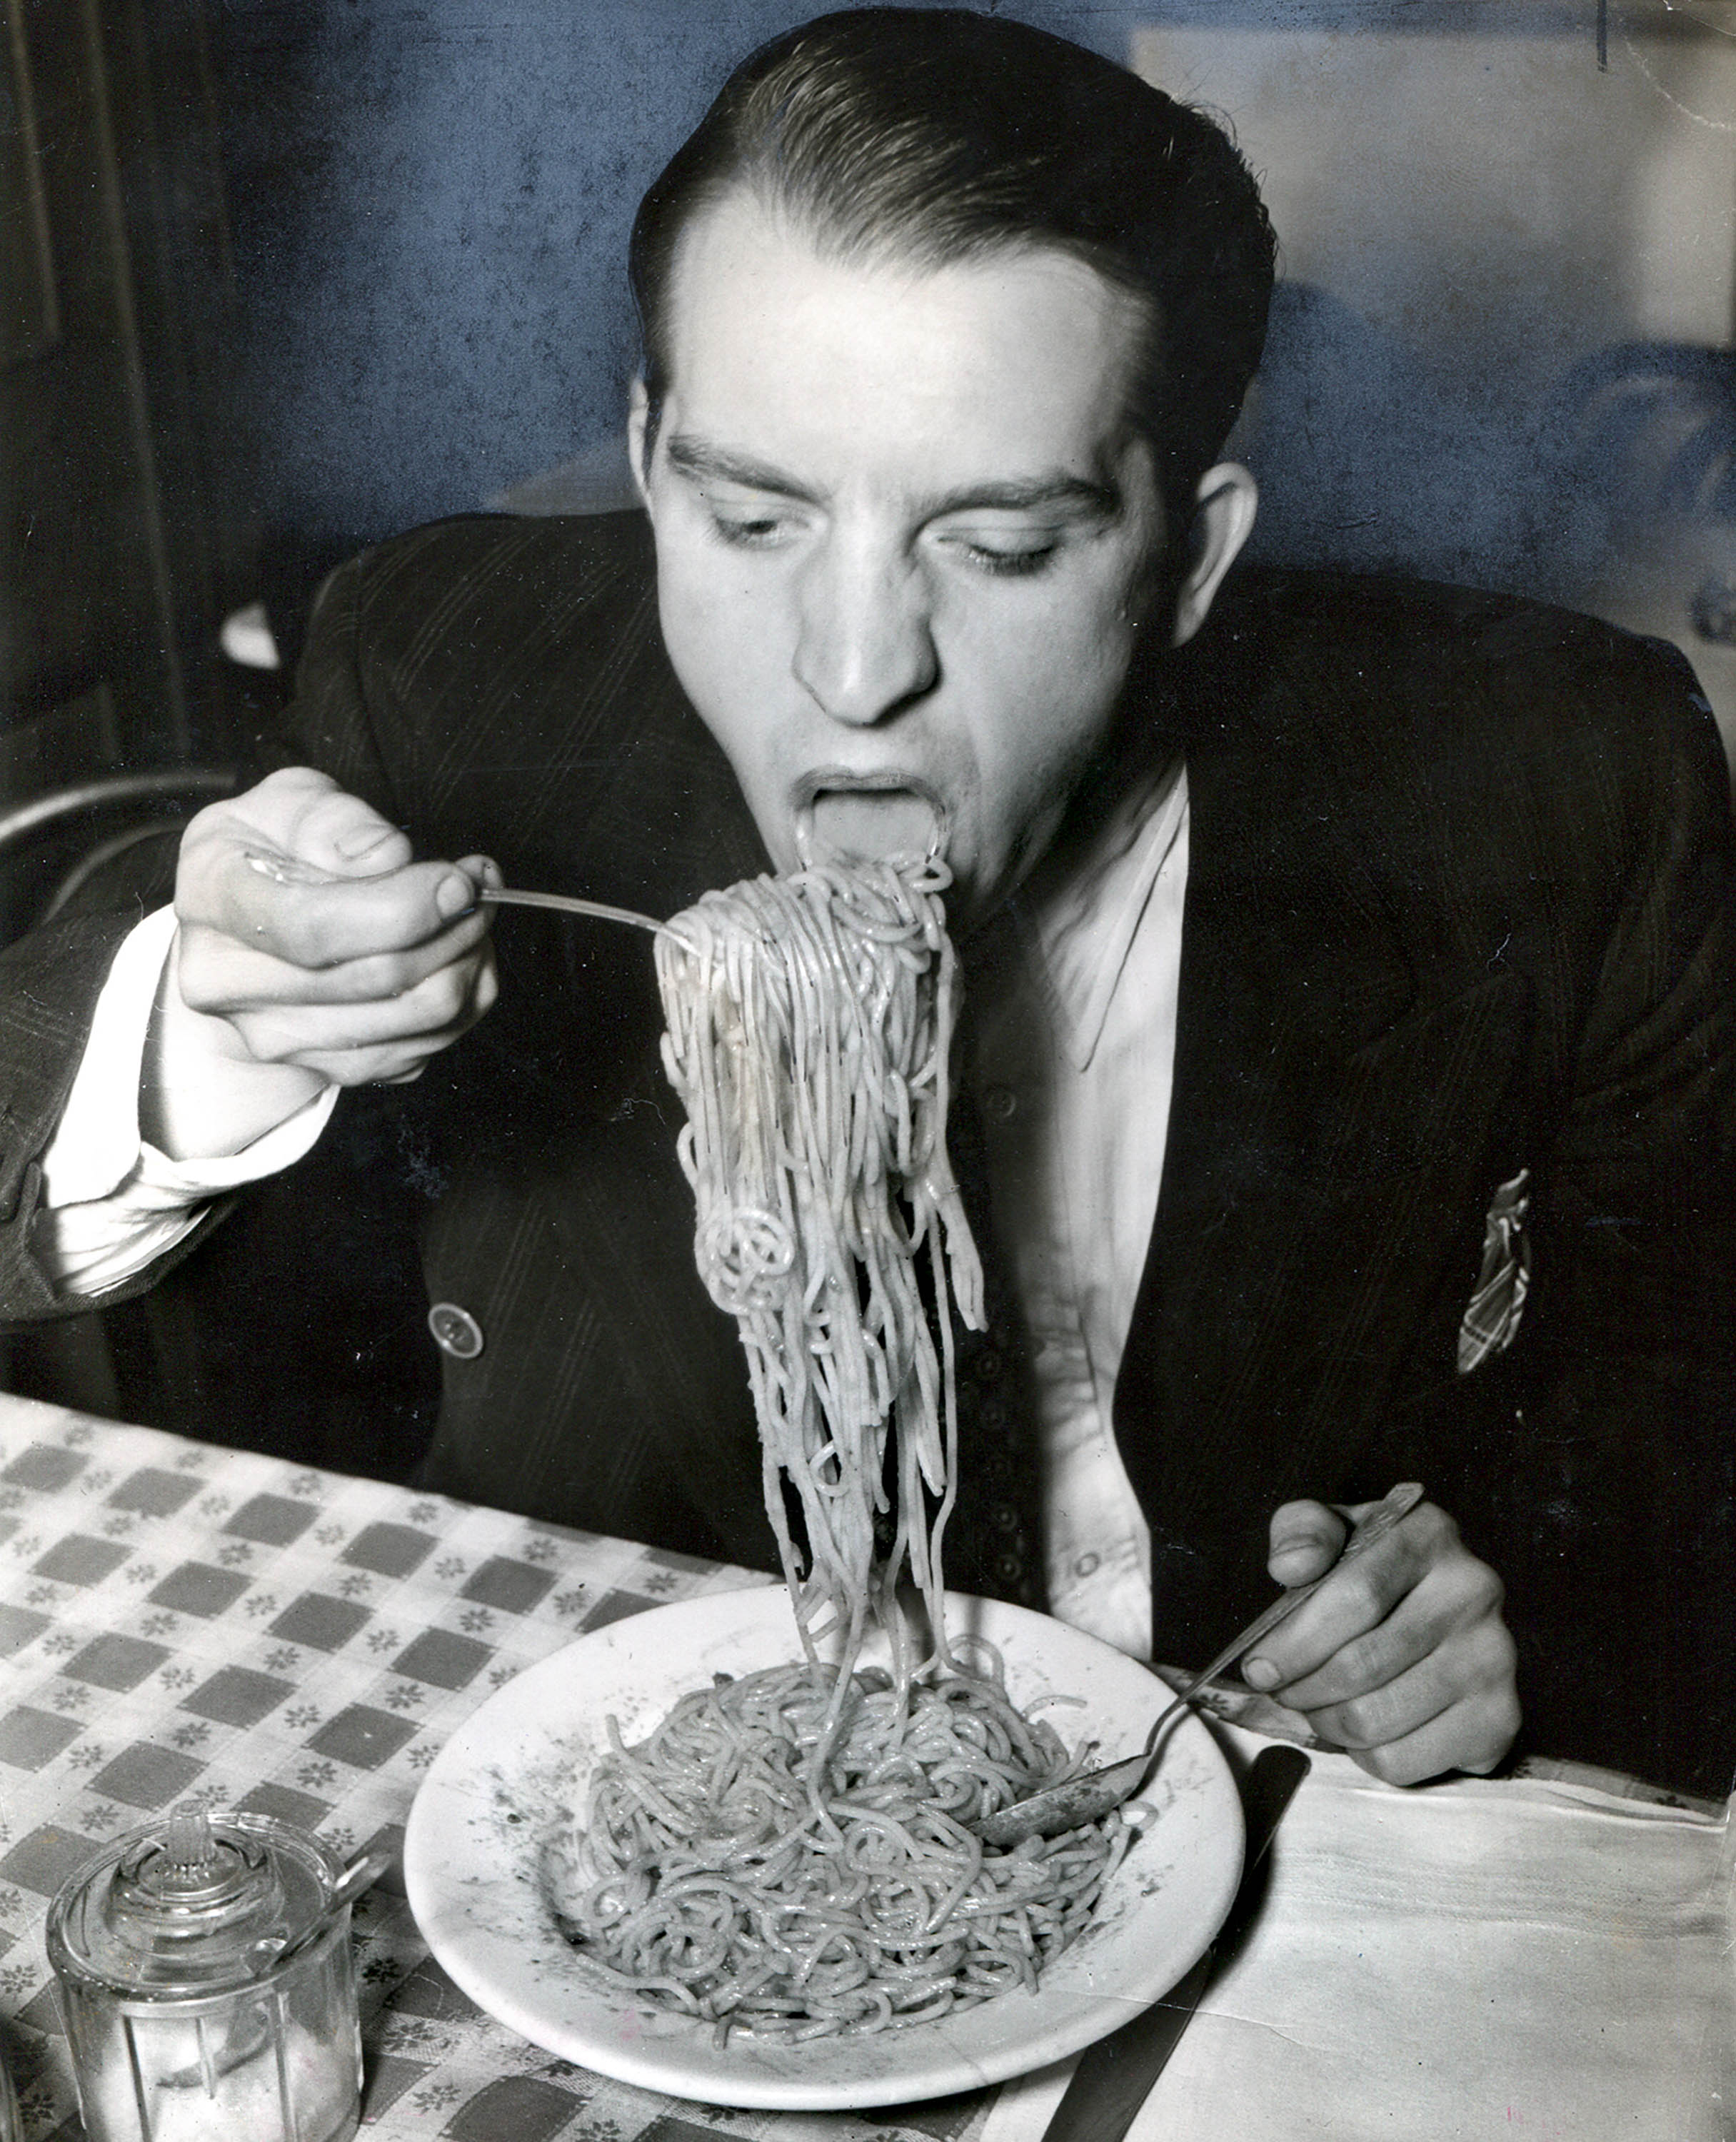 Phillip J. Stazzone is on WPA and Enjoys His Favourite Food as He's Heard That the Army Doesn't Go in Very Strong for Serving Spaghetti, 1940, Weegee / International Centre of Photography, Courtesy Ira and Suzanne Richer